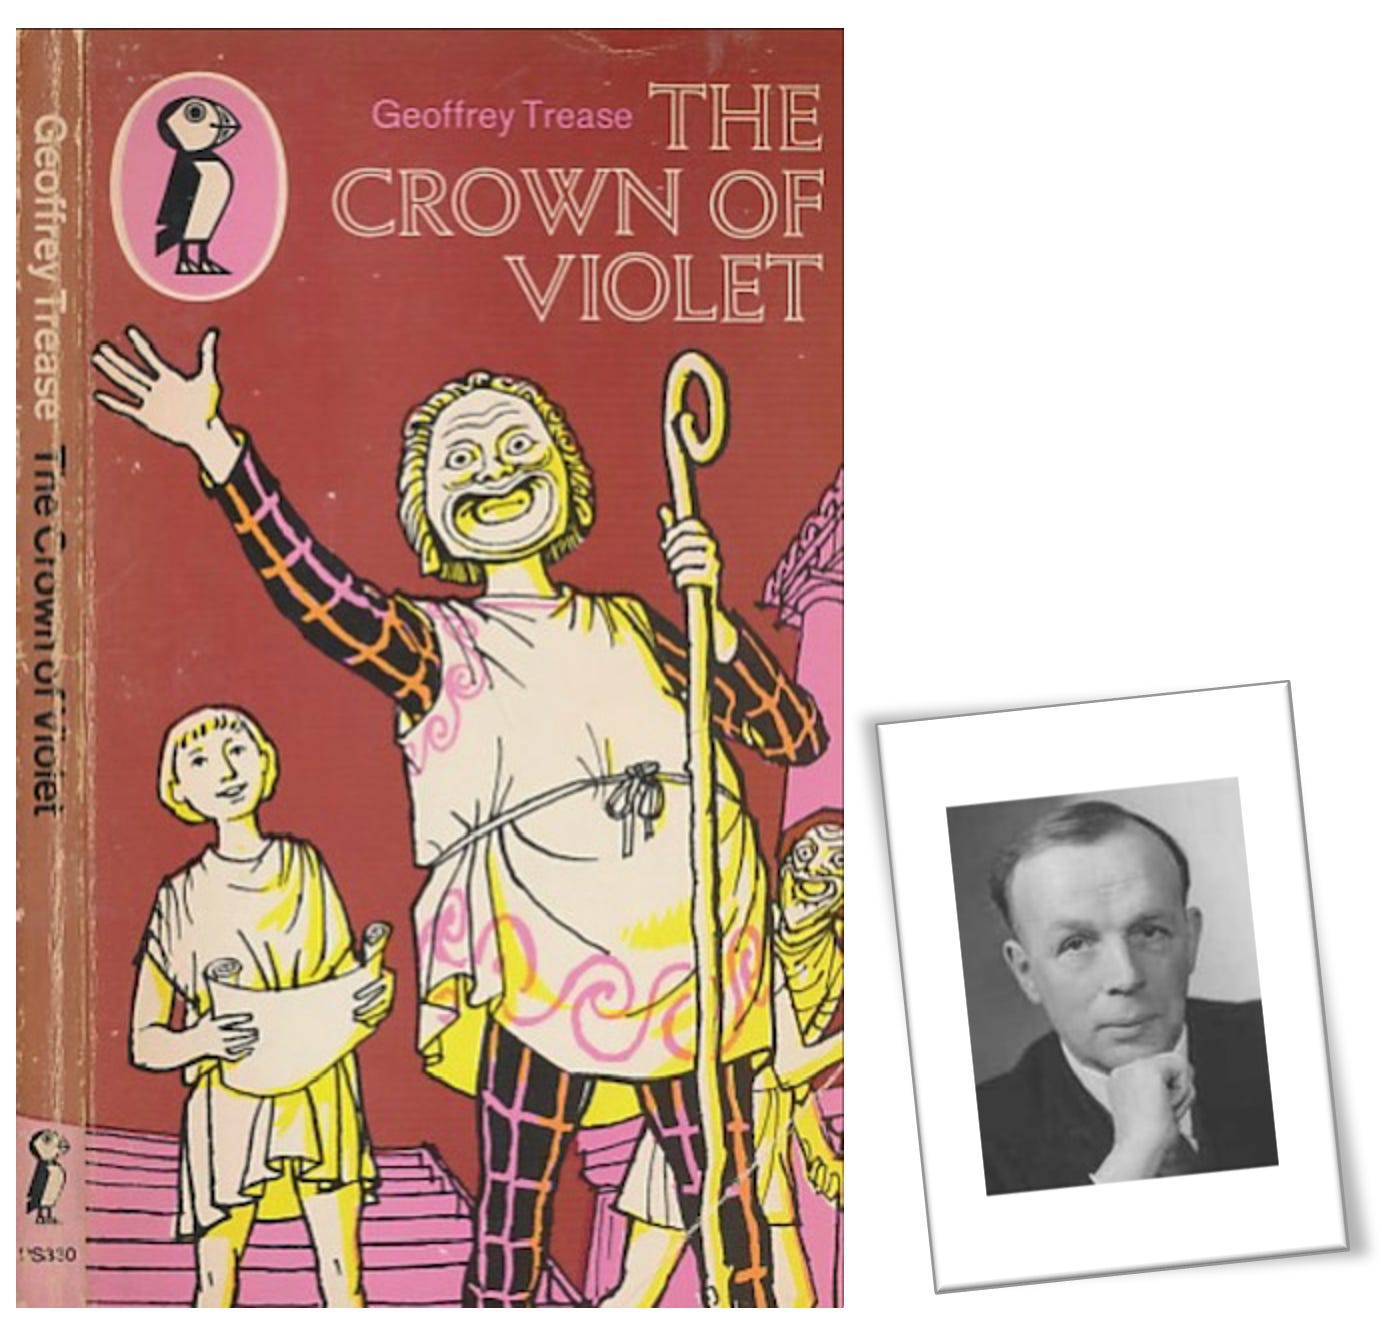 The Crown of Violet by Geoffrey Trease